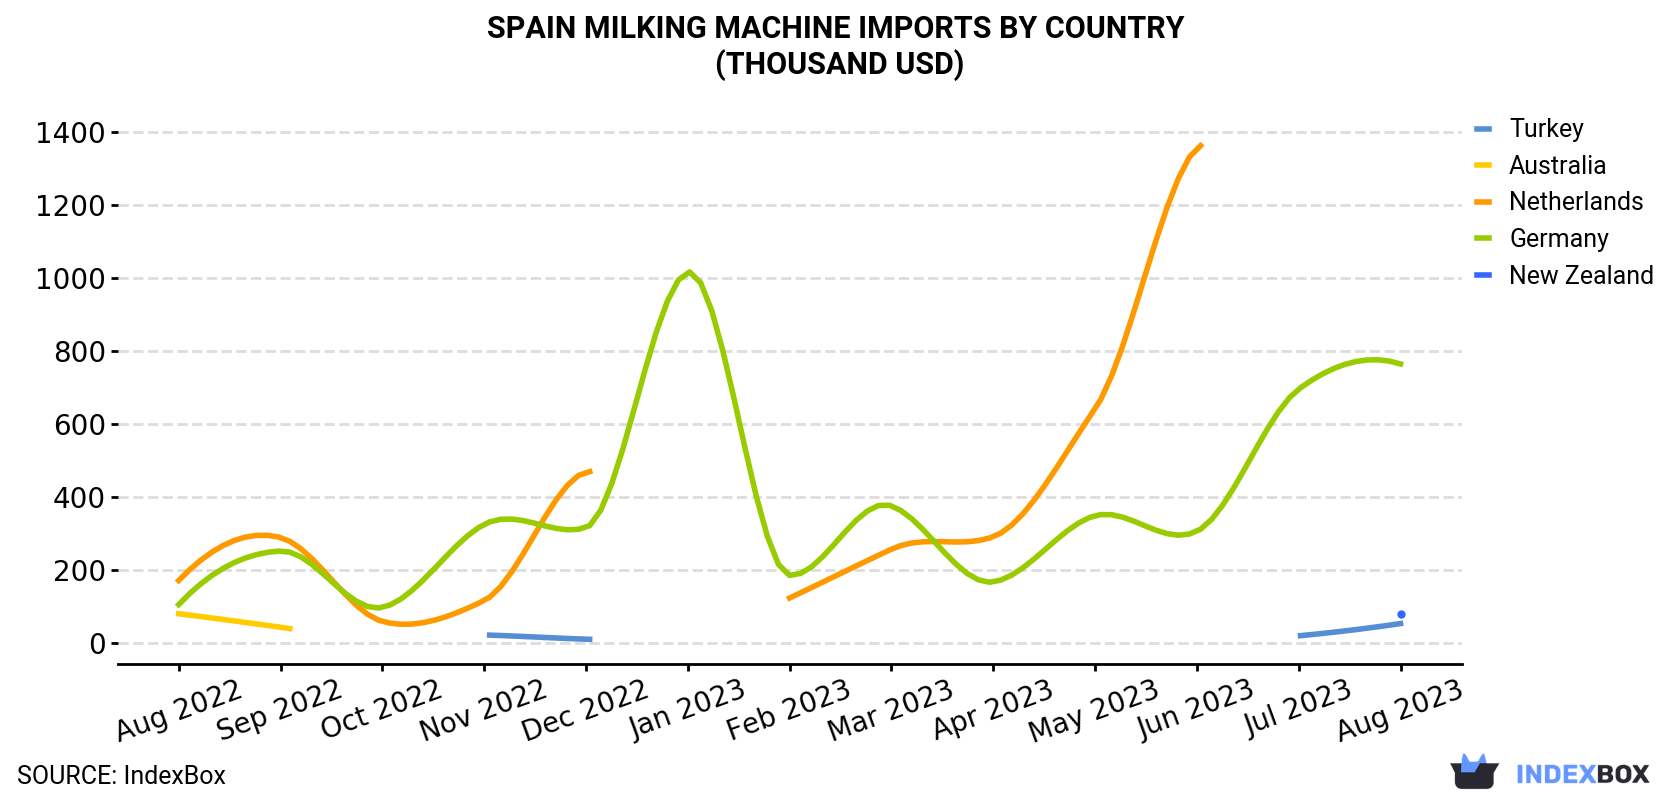 Spain Milking Machine Imports By Country (Thousand USD)